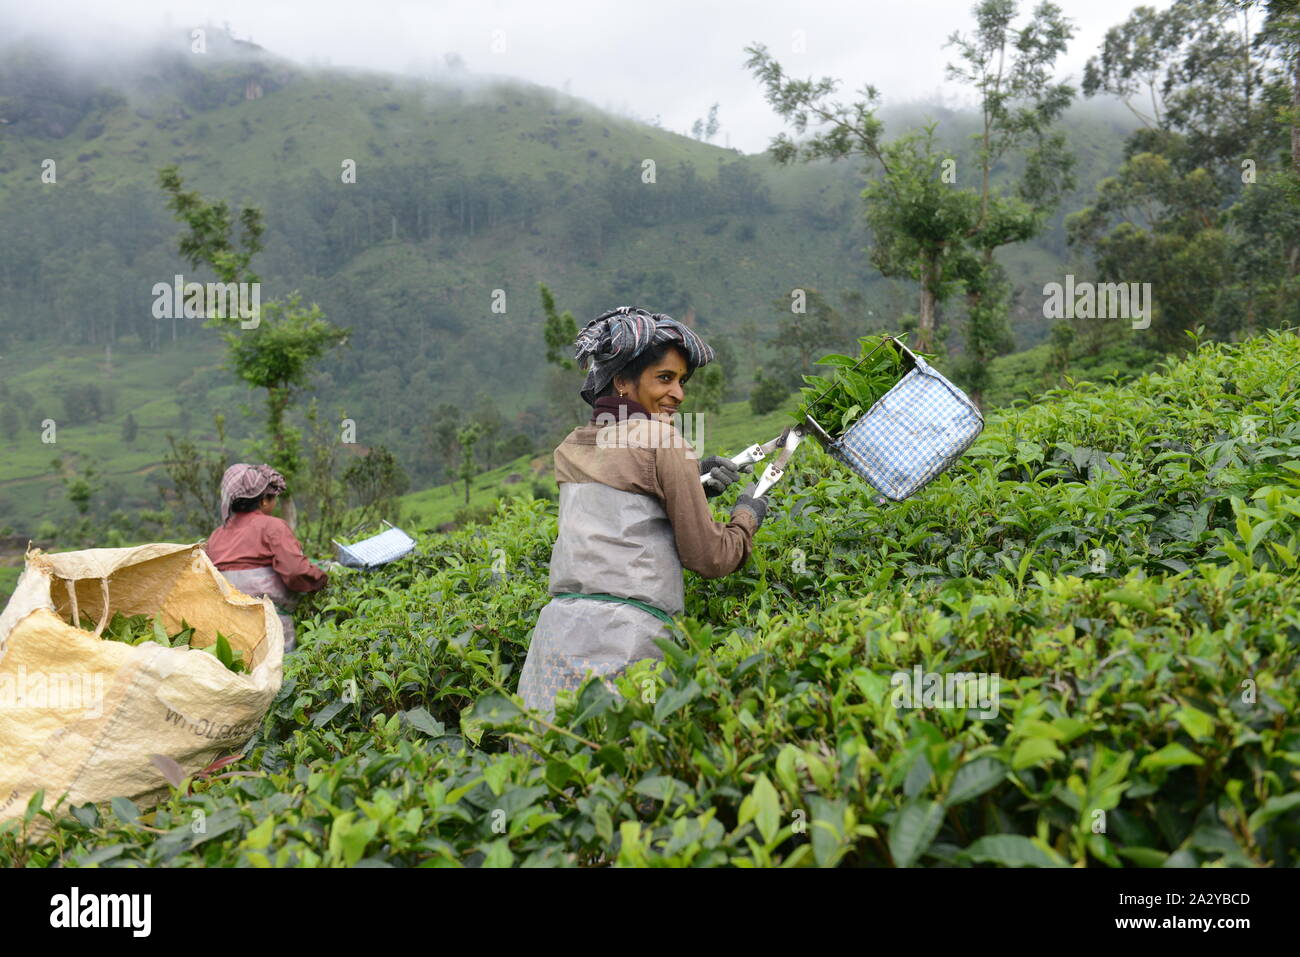 Tamil workers plucking Tea leaves at a tea plantation in Munnar, Kerela. Stock Photo